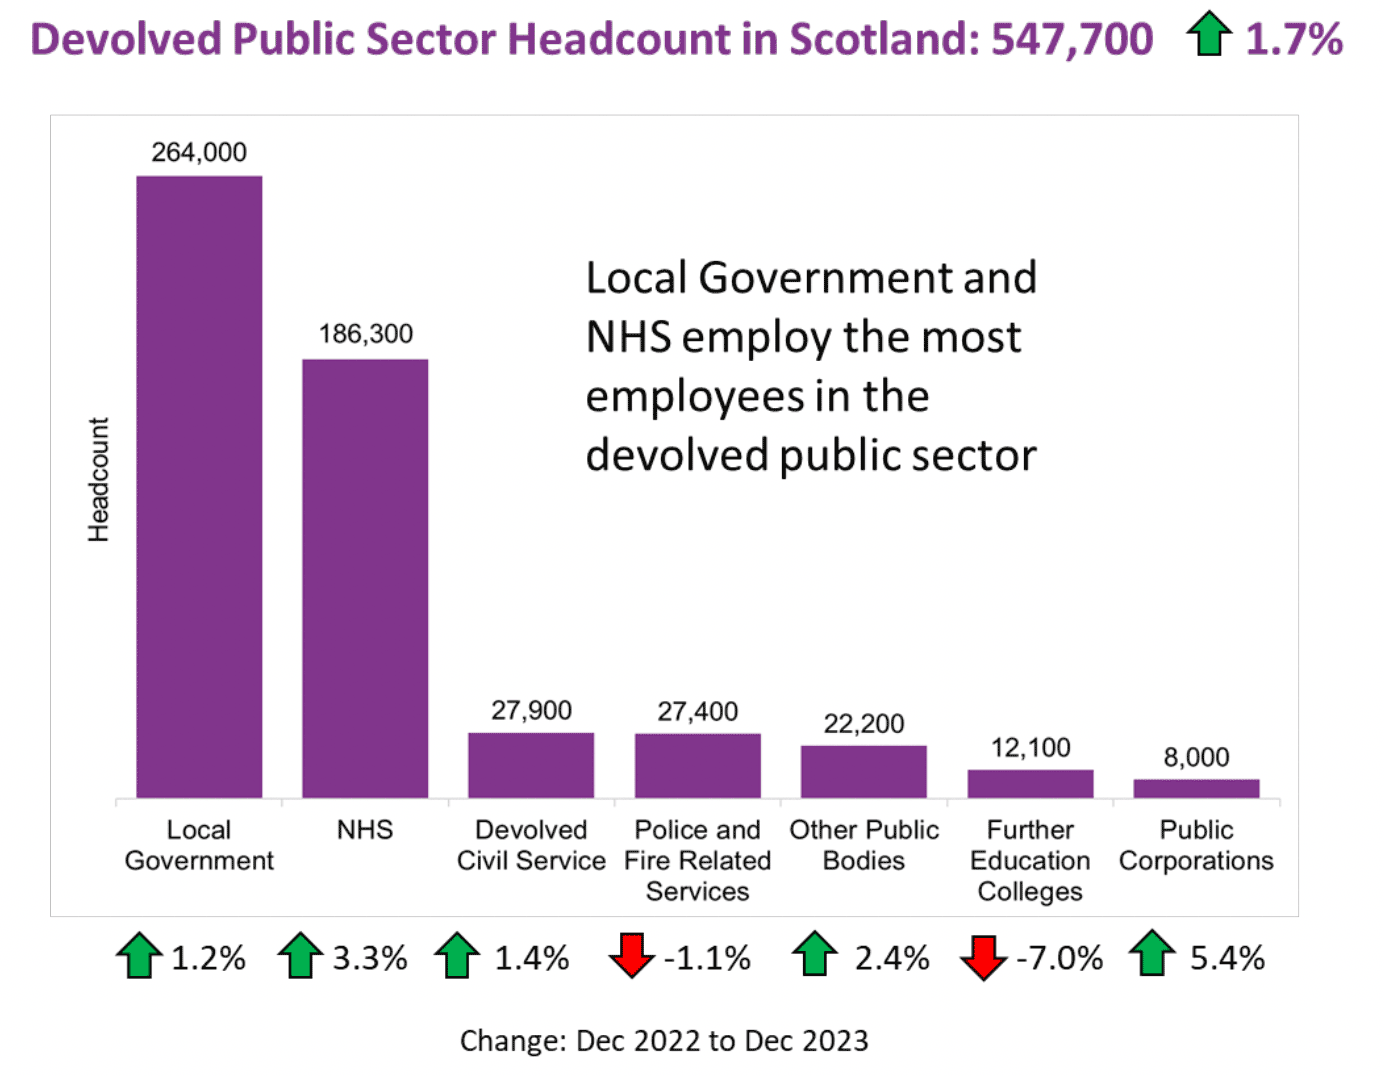 A figure showing the devolved public sector headcount in Scotland. Total headcount is 547,700, and has risen 1.7% over the year. Headcount is largest in local government, at 264,000, and then the NHS, at 186,300.